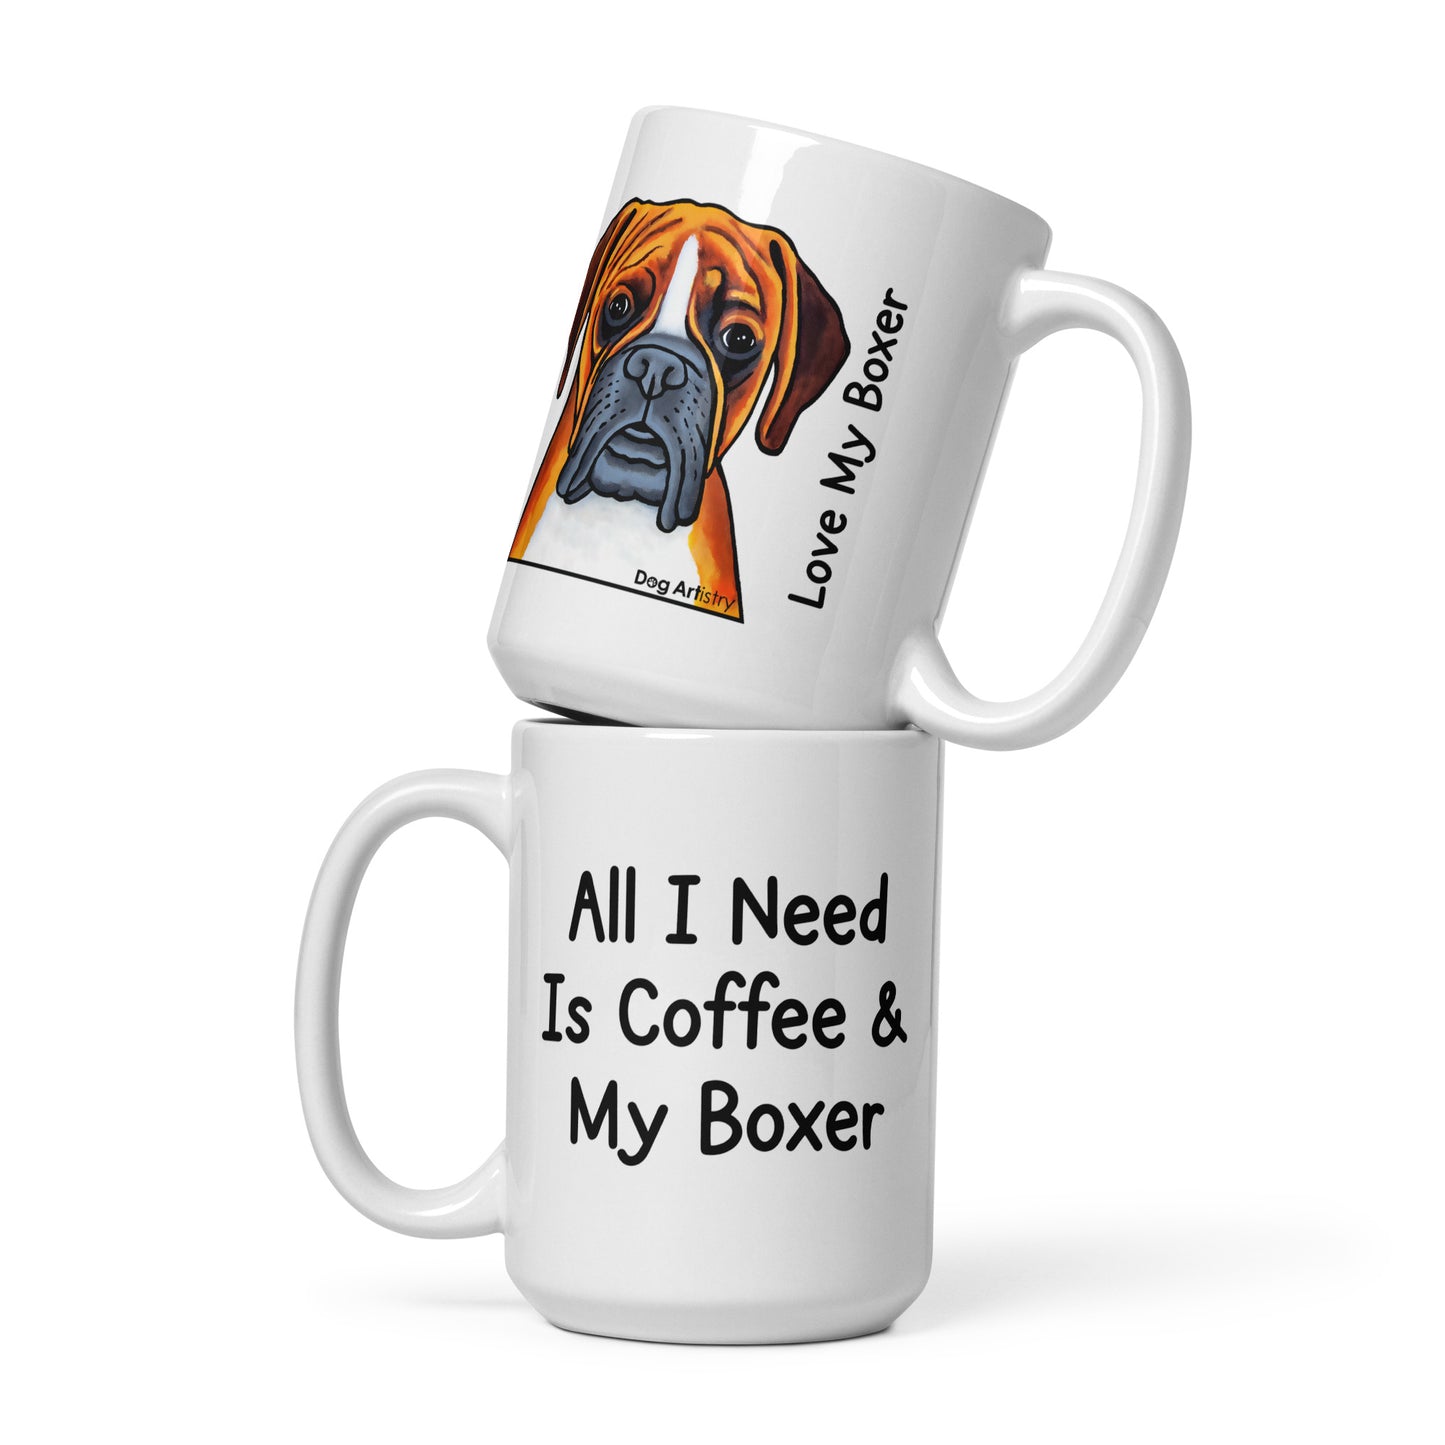 All I Need Is Coffee and My Boxer - White Glossy Mug